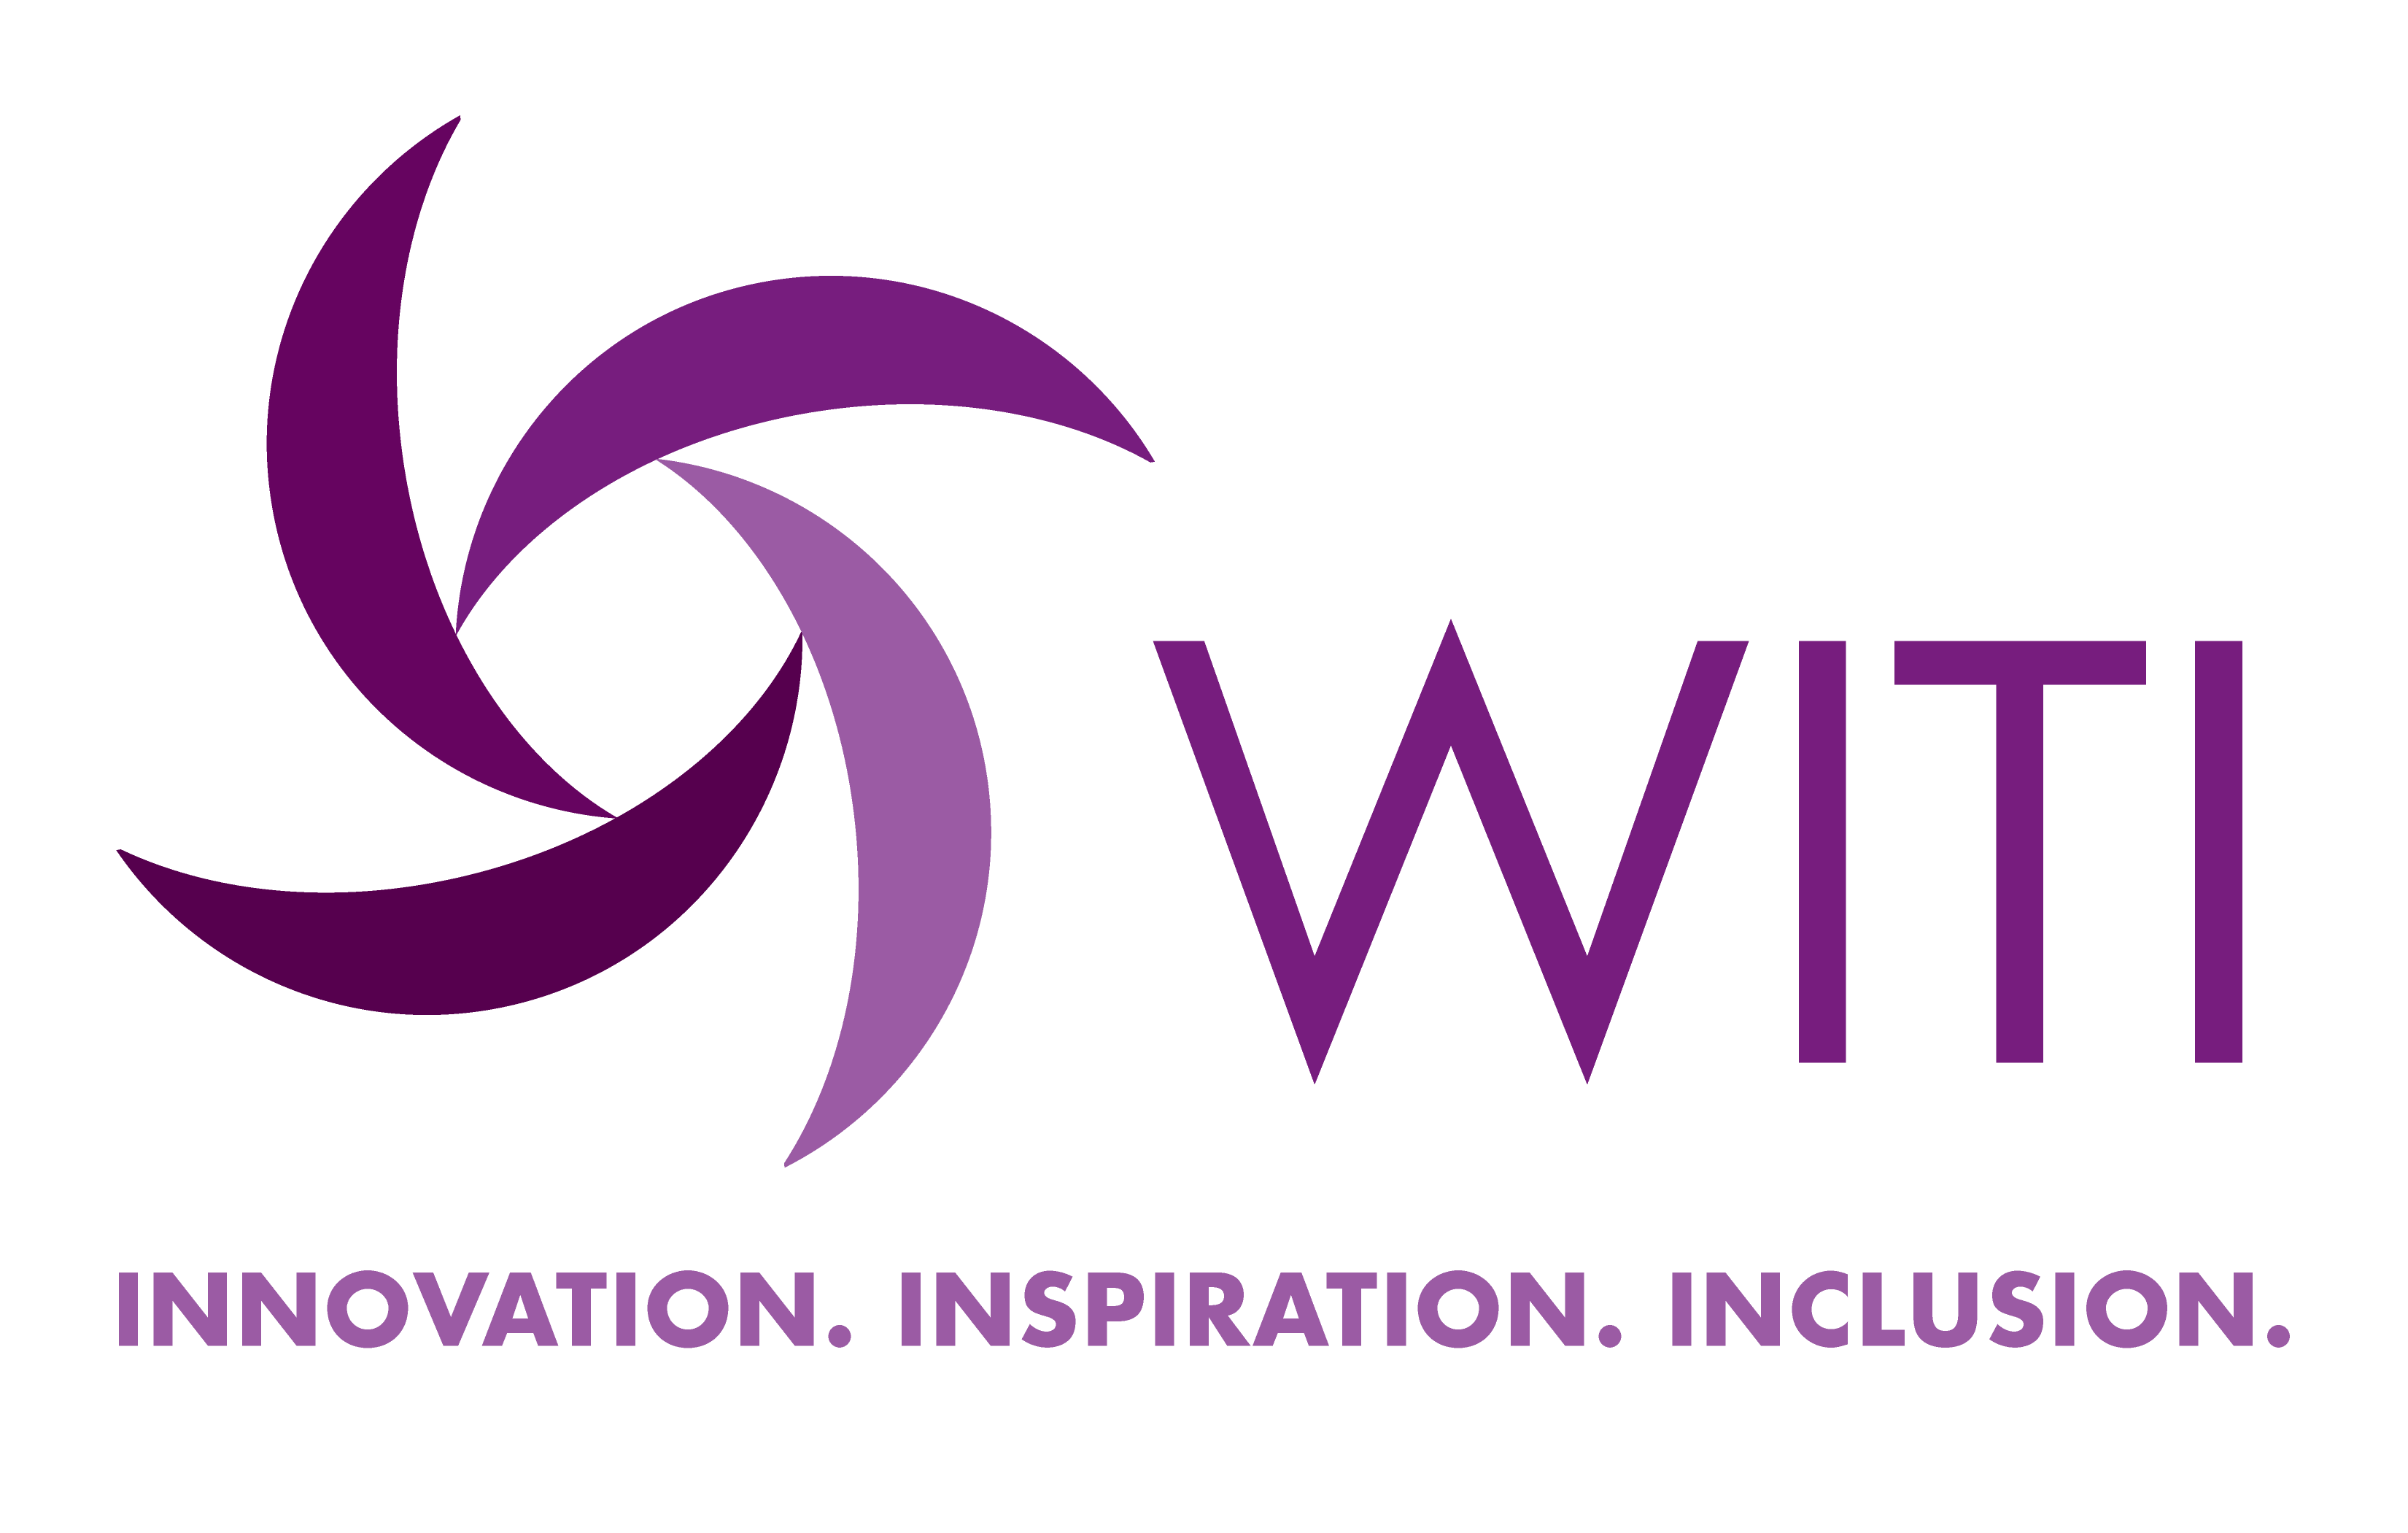 WITI_Logo_innovation_Inspiration_Inclusion.png